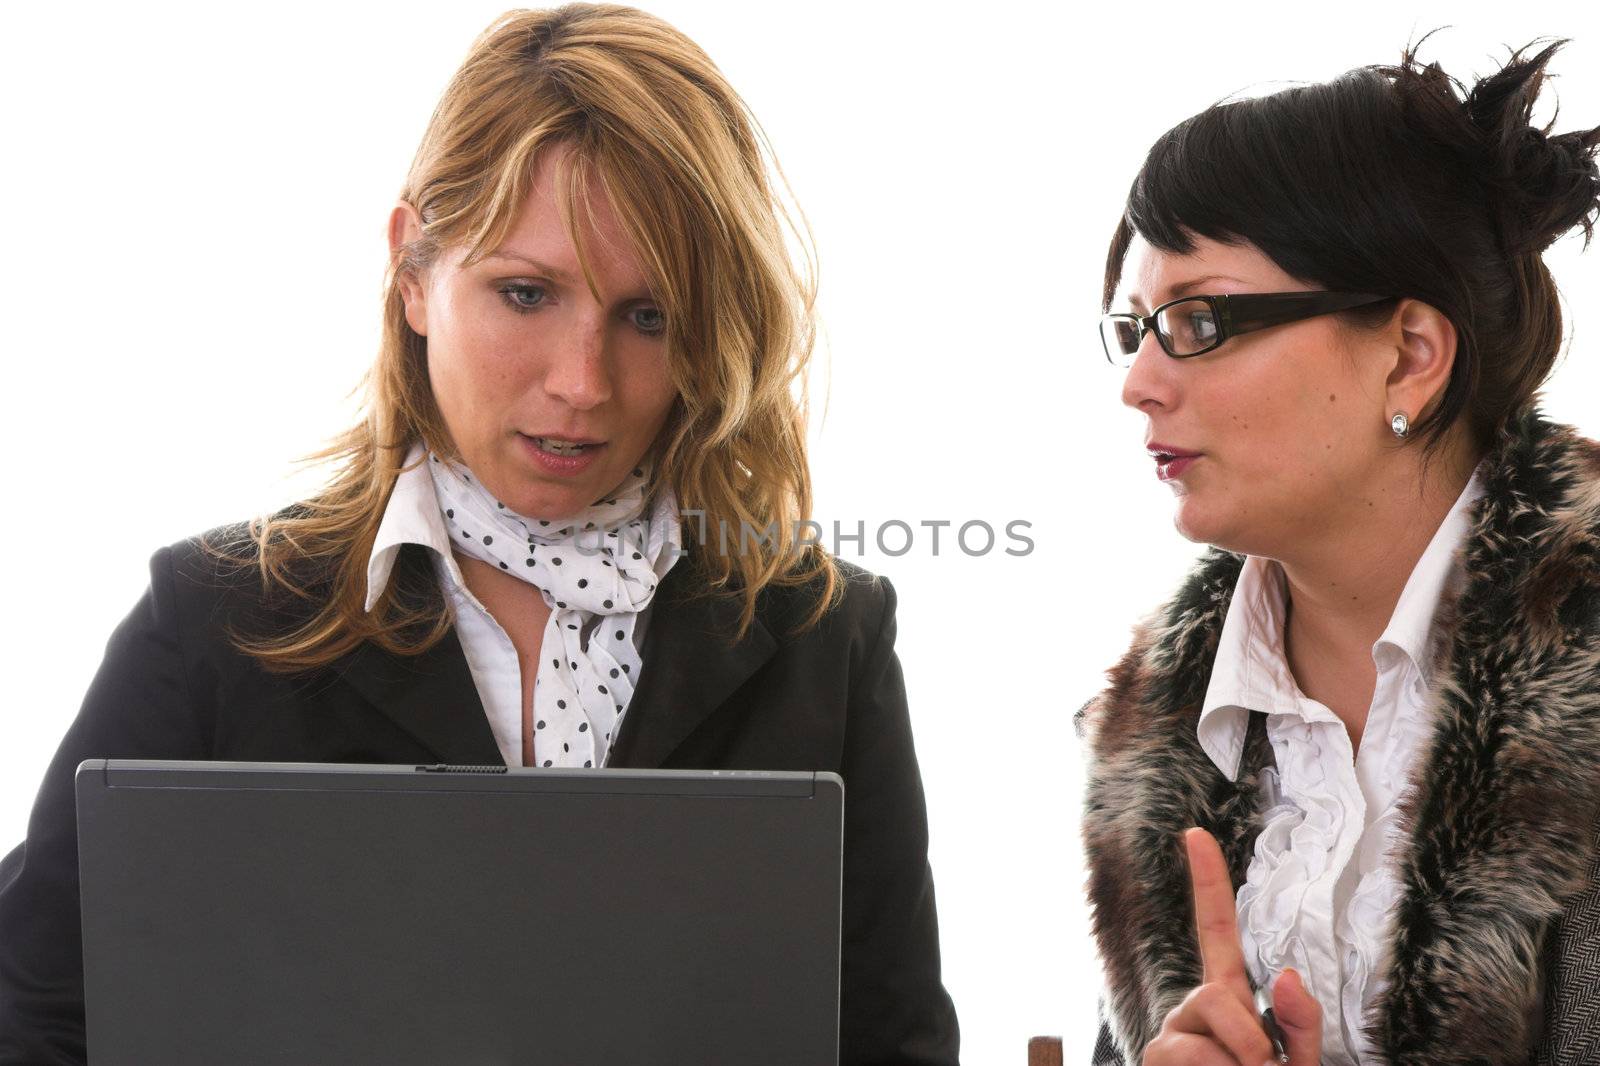 Two business women sitting together and having a meeting